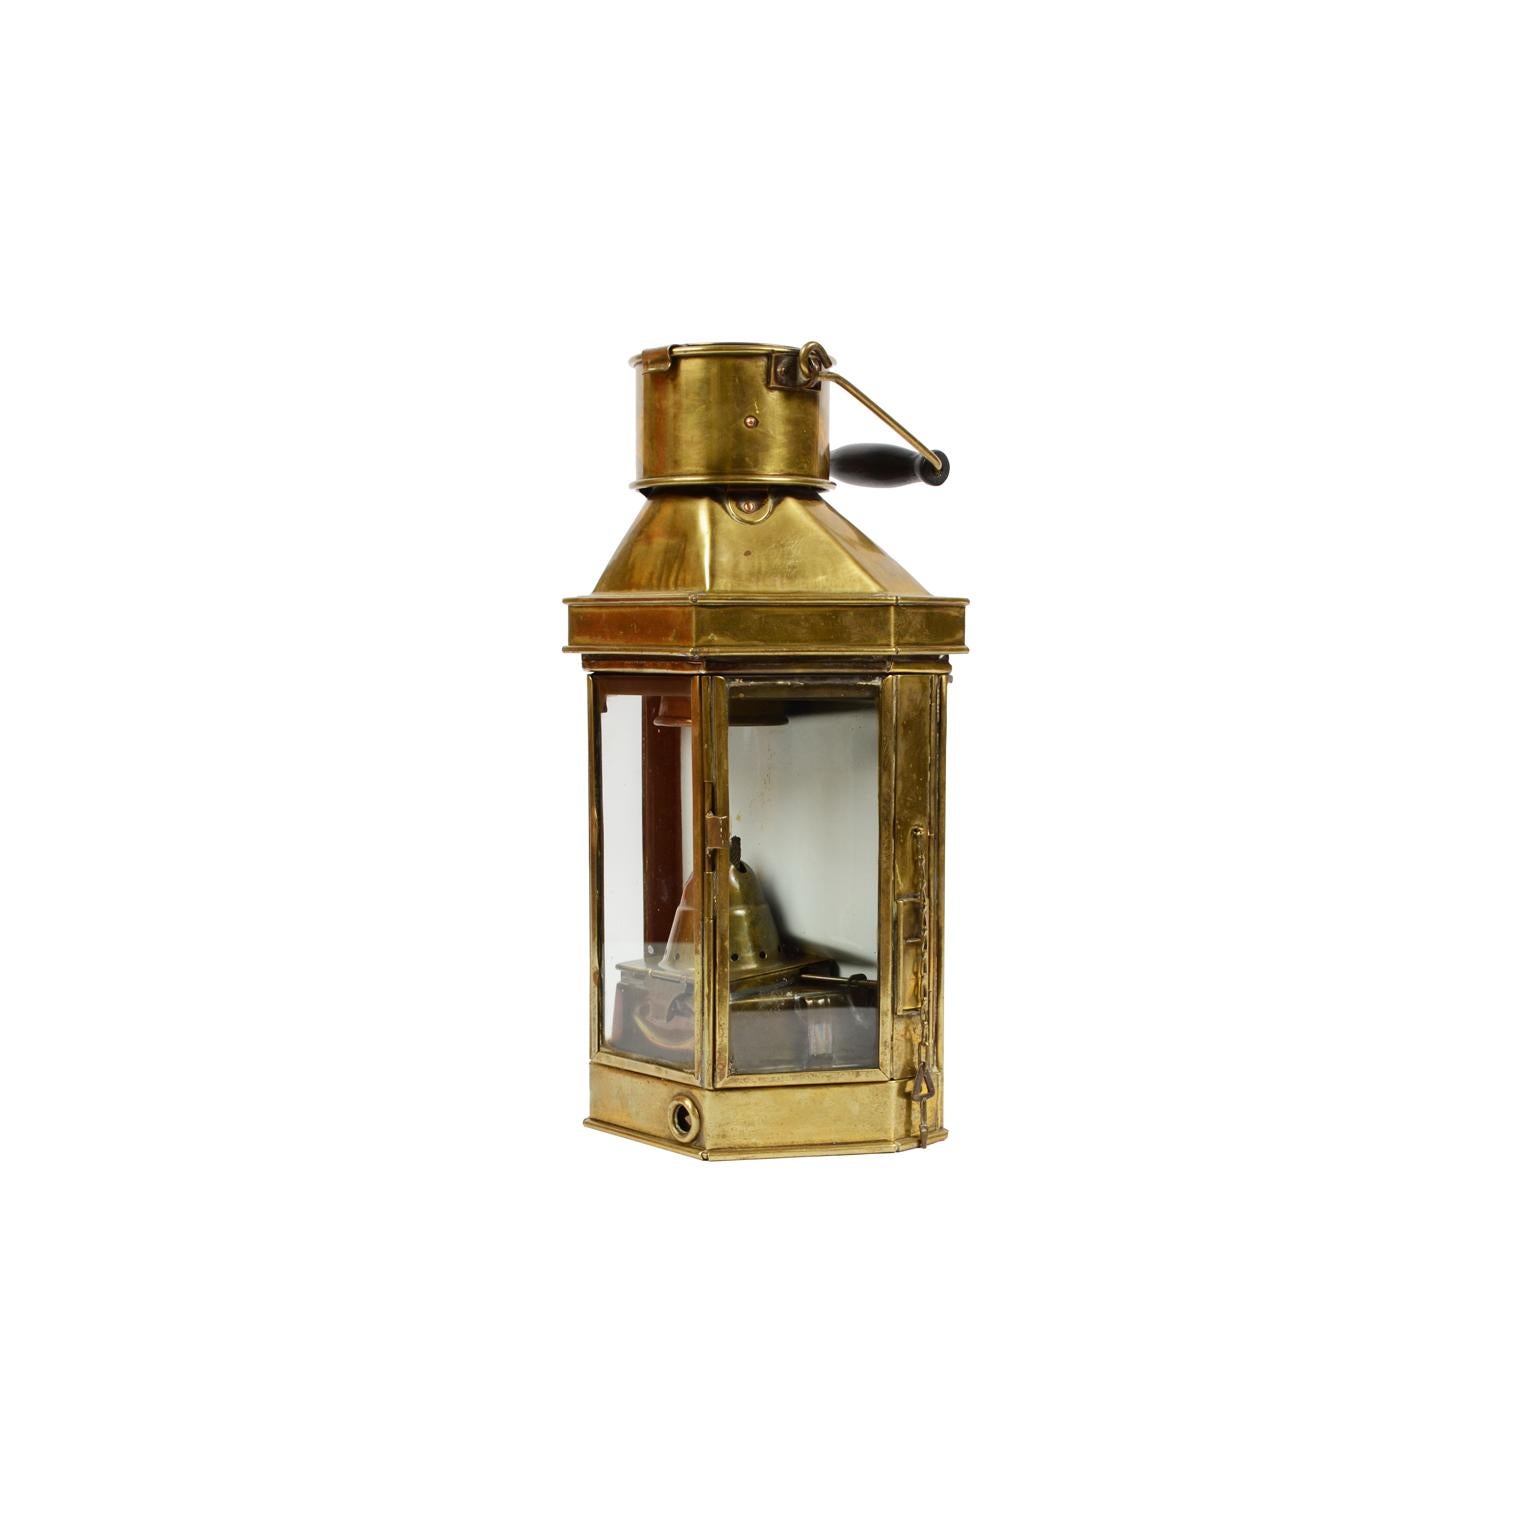 Oil lamp, brass and glass; rear bracket for hanging it. Signed Bulpitt, English manufacture end of the 19th century. Height cm 41, inches 16.14, width cm 21, inches 8.26. Very good condition.
Bulpitt & Sons Ltd was an electrical goods manufacturer